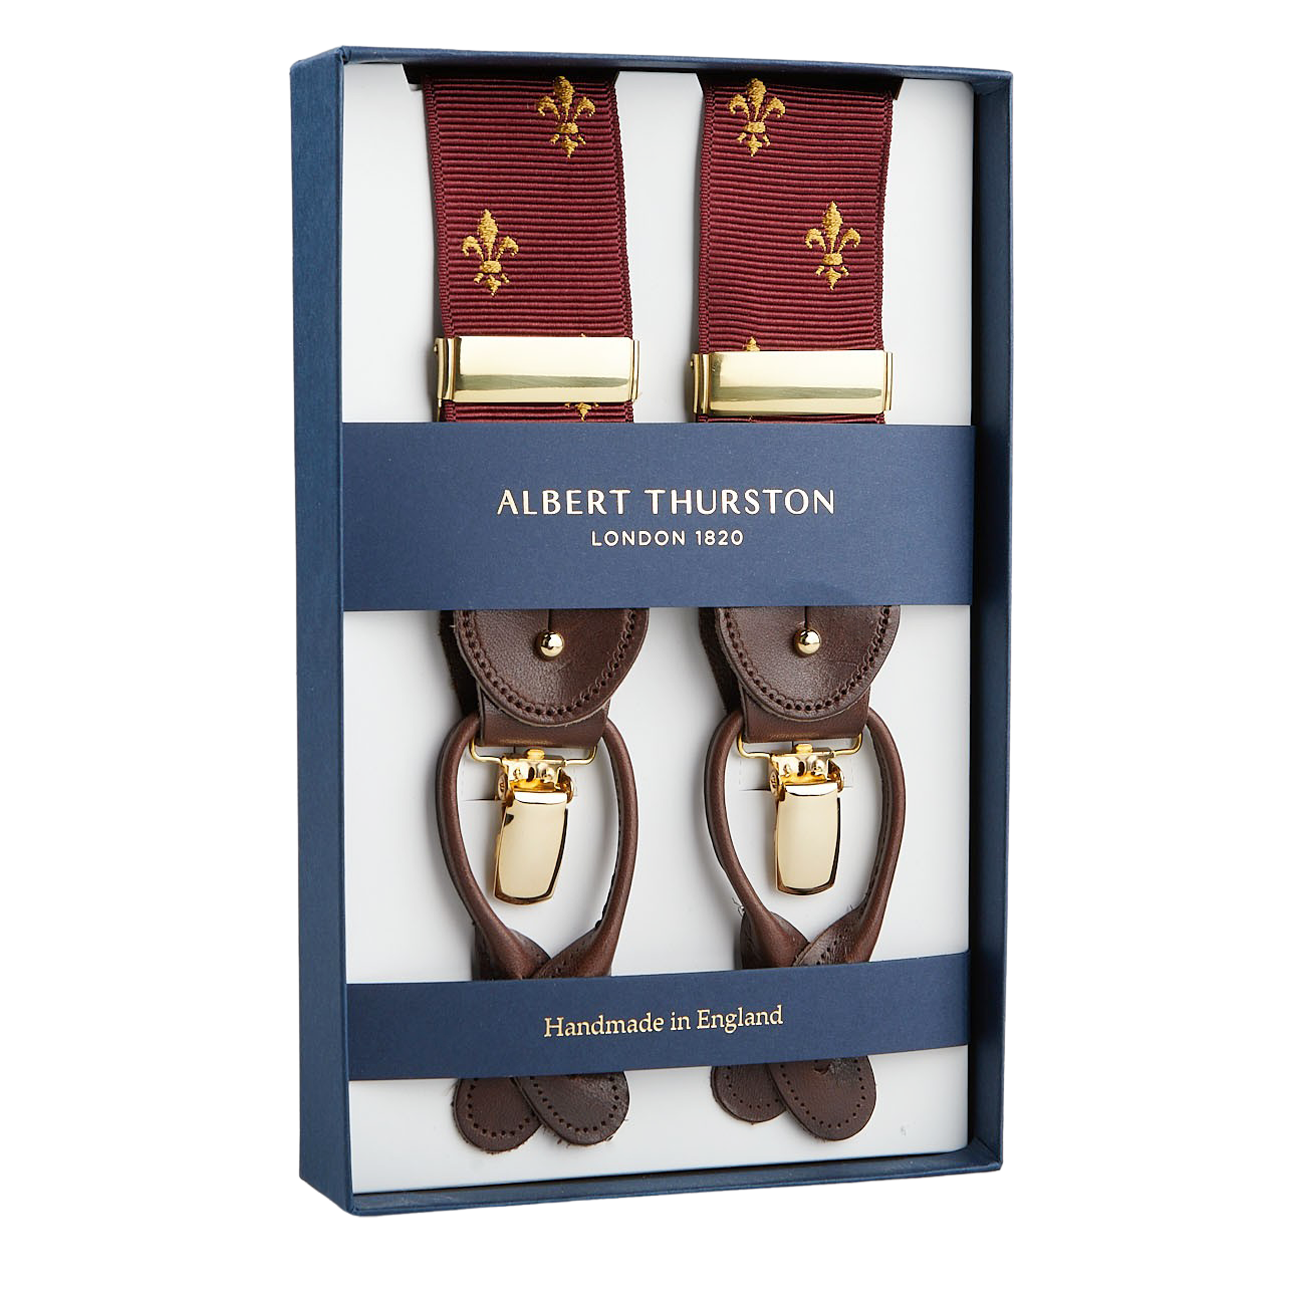 Albert Thurston classic Bordeaux with Gold French Lily 35 mm braces with gold-tone hardware and brown leather accents, displayed in an open box labeled "Handmade in England.